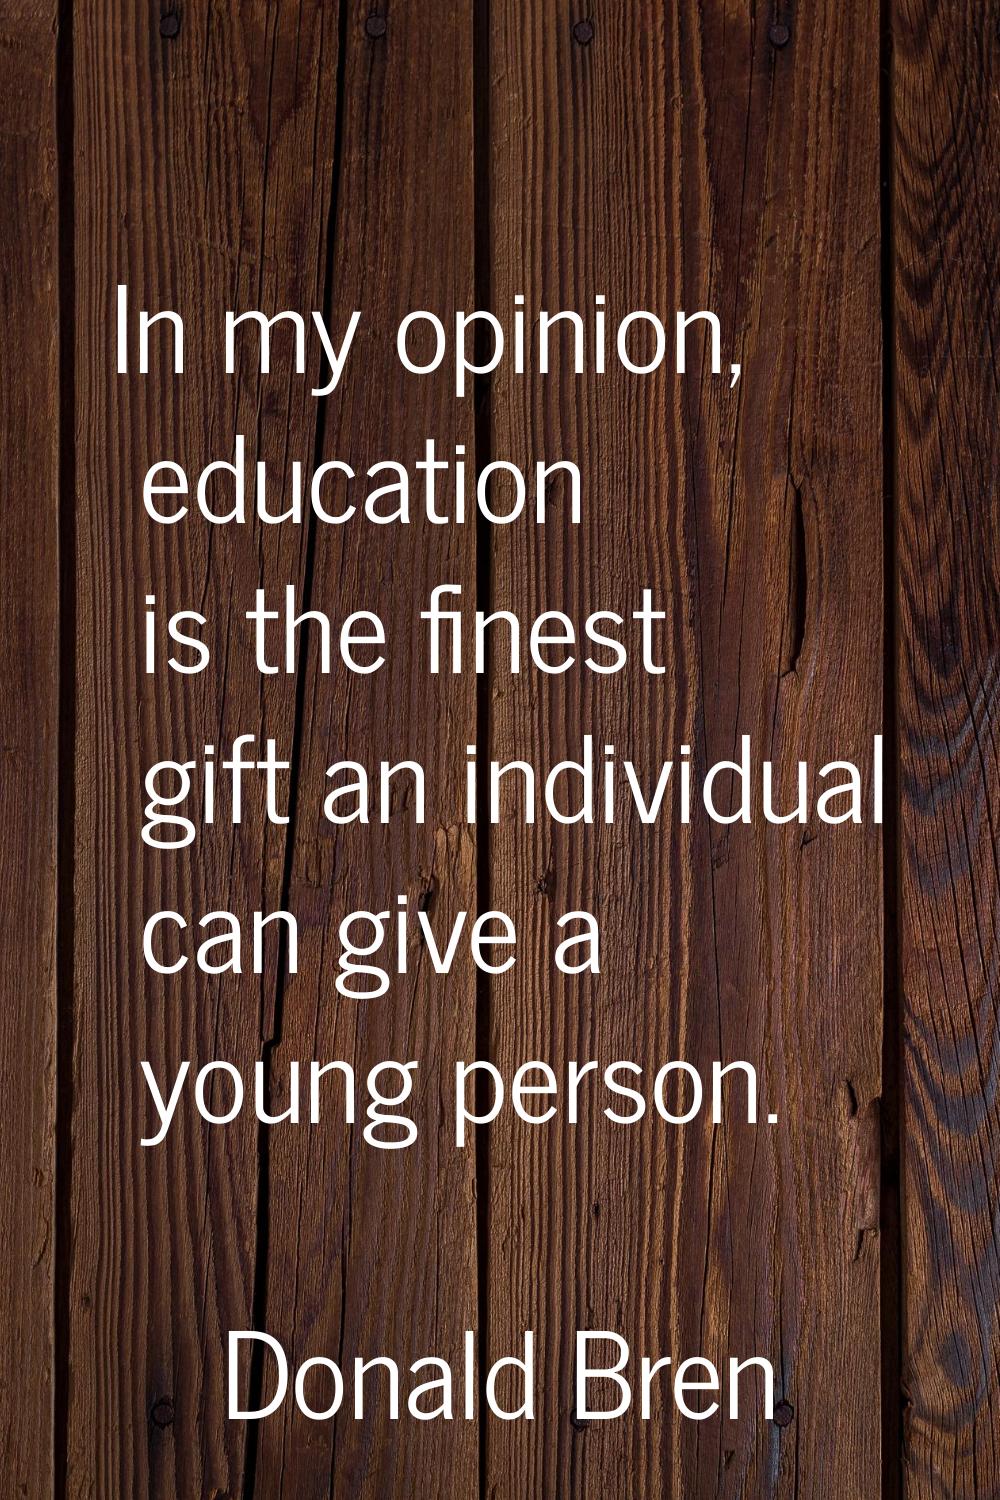 In my opinion, education is the finest gift an individual can give a young person.